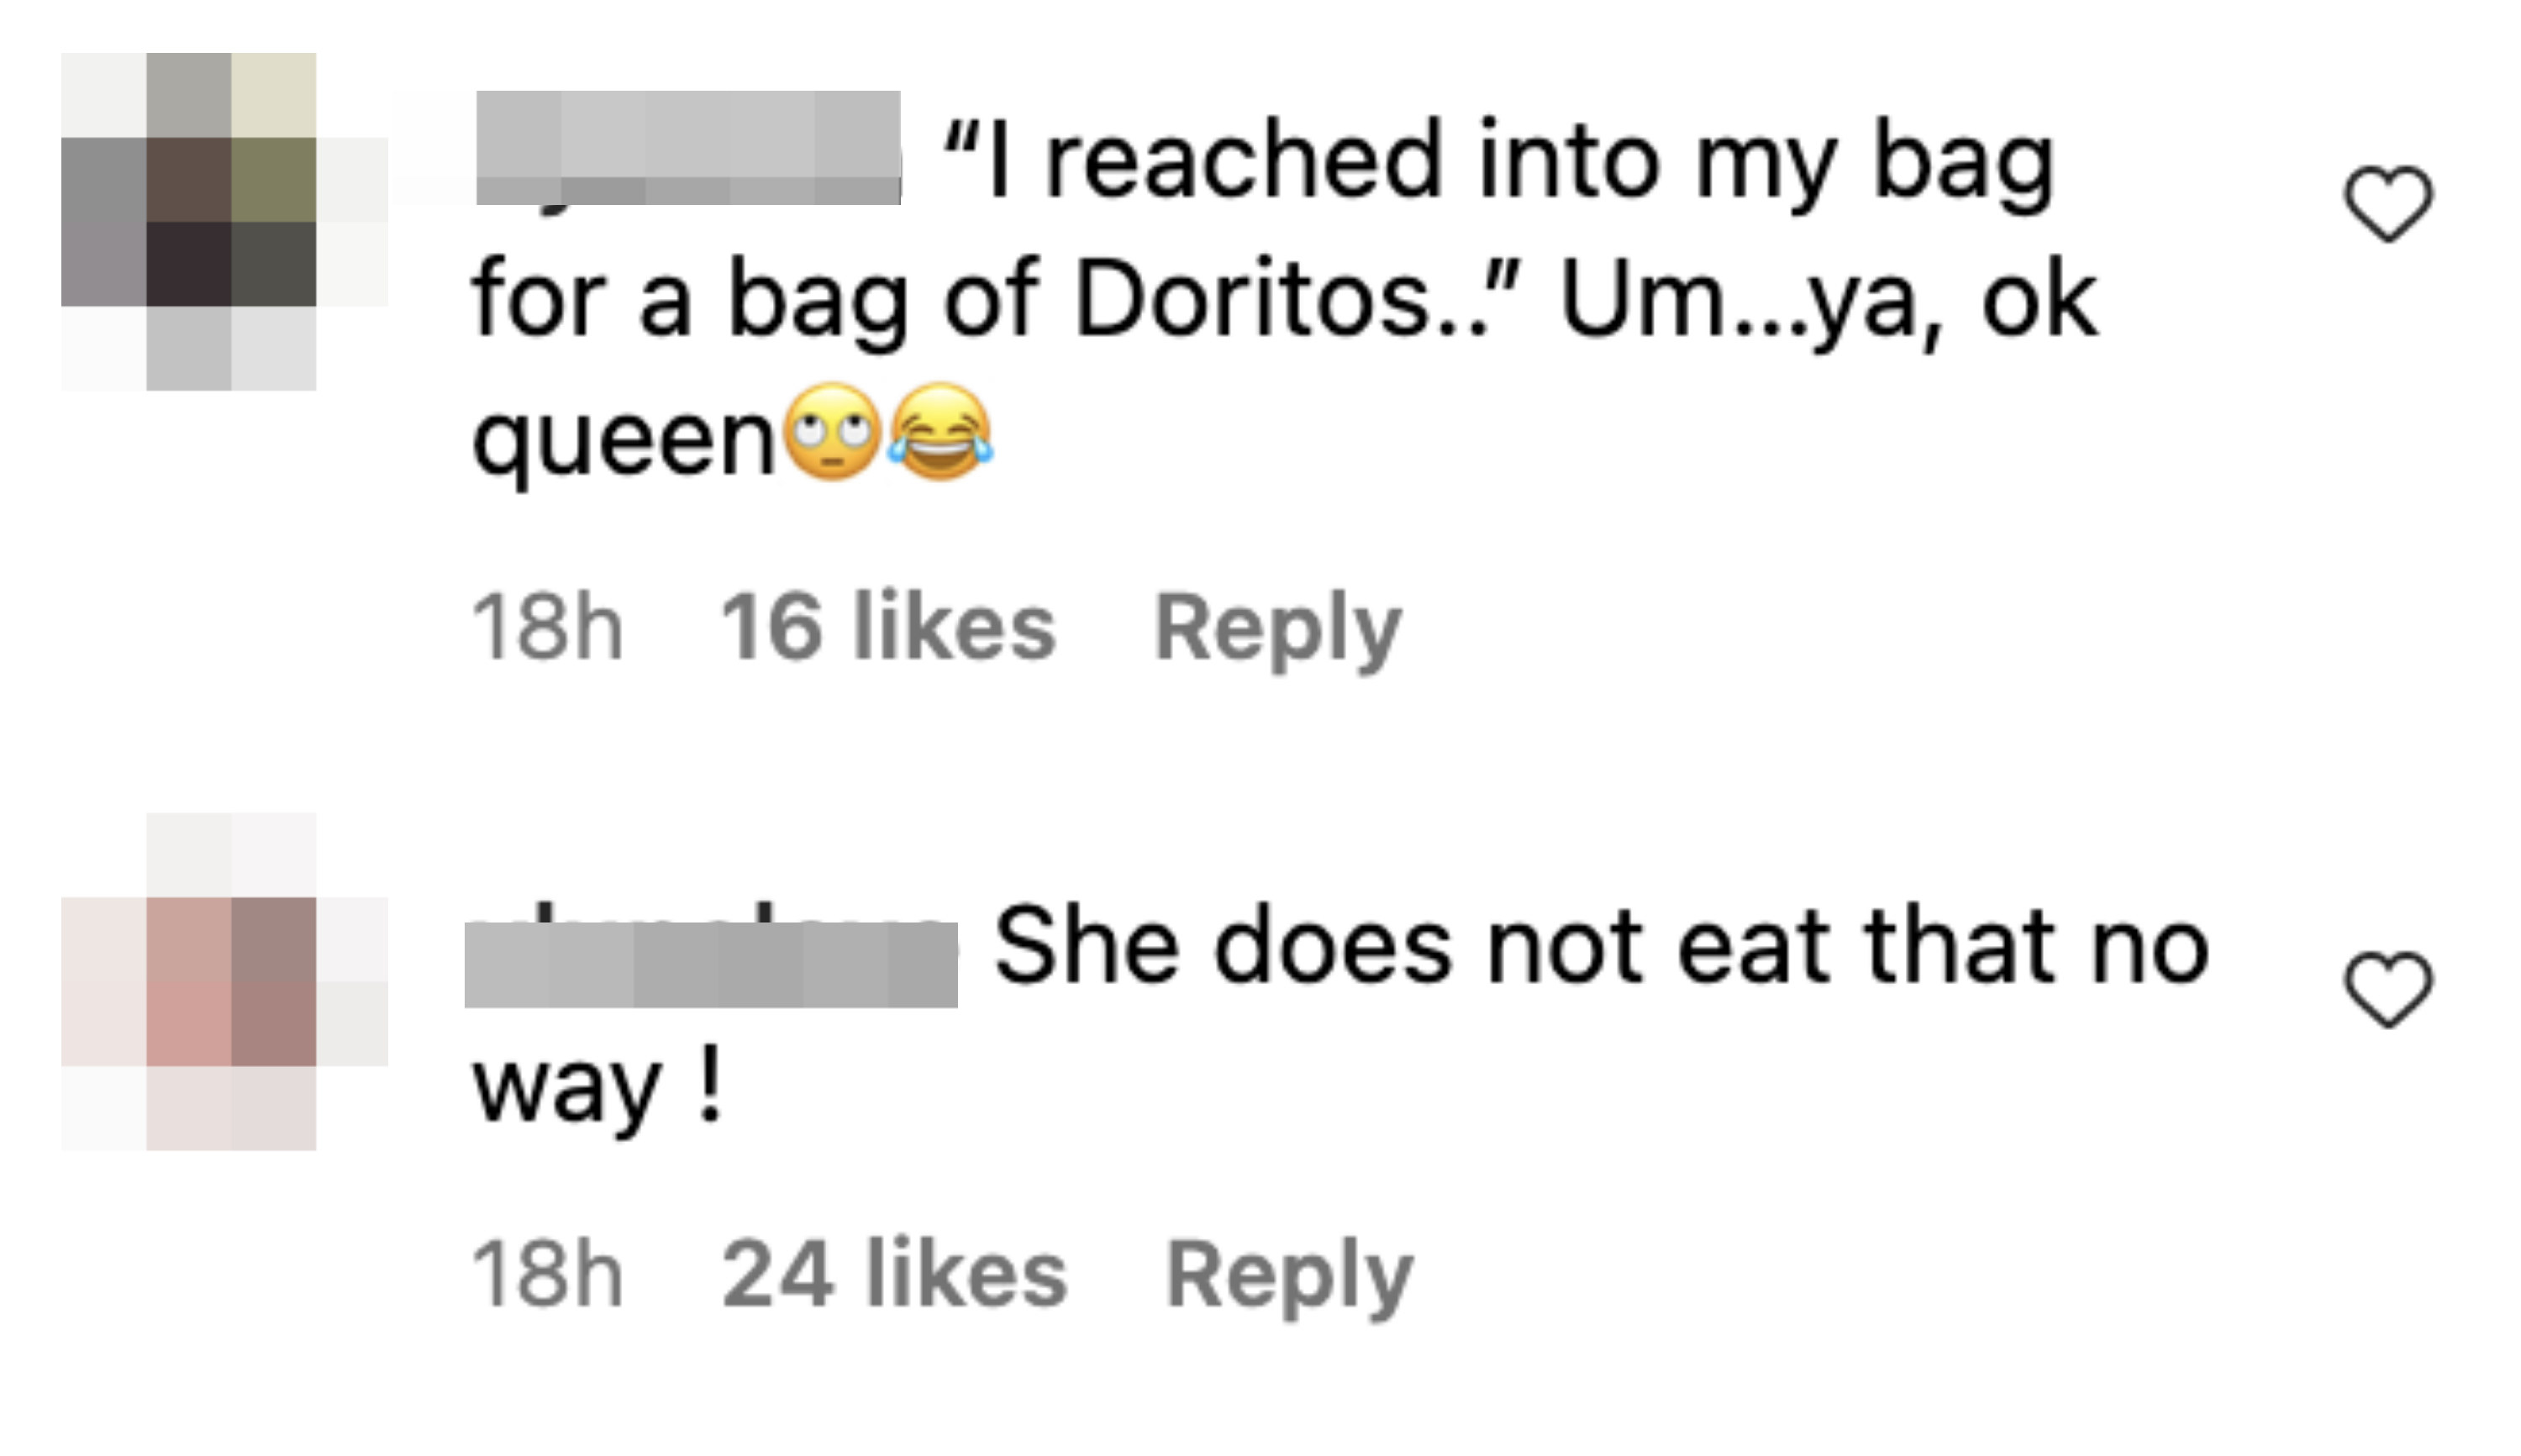 she does not eat that no way